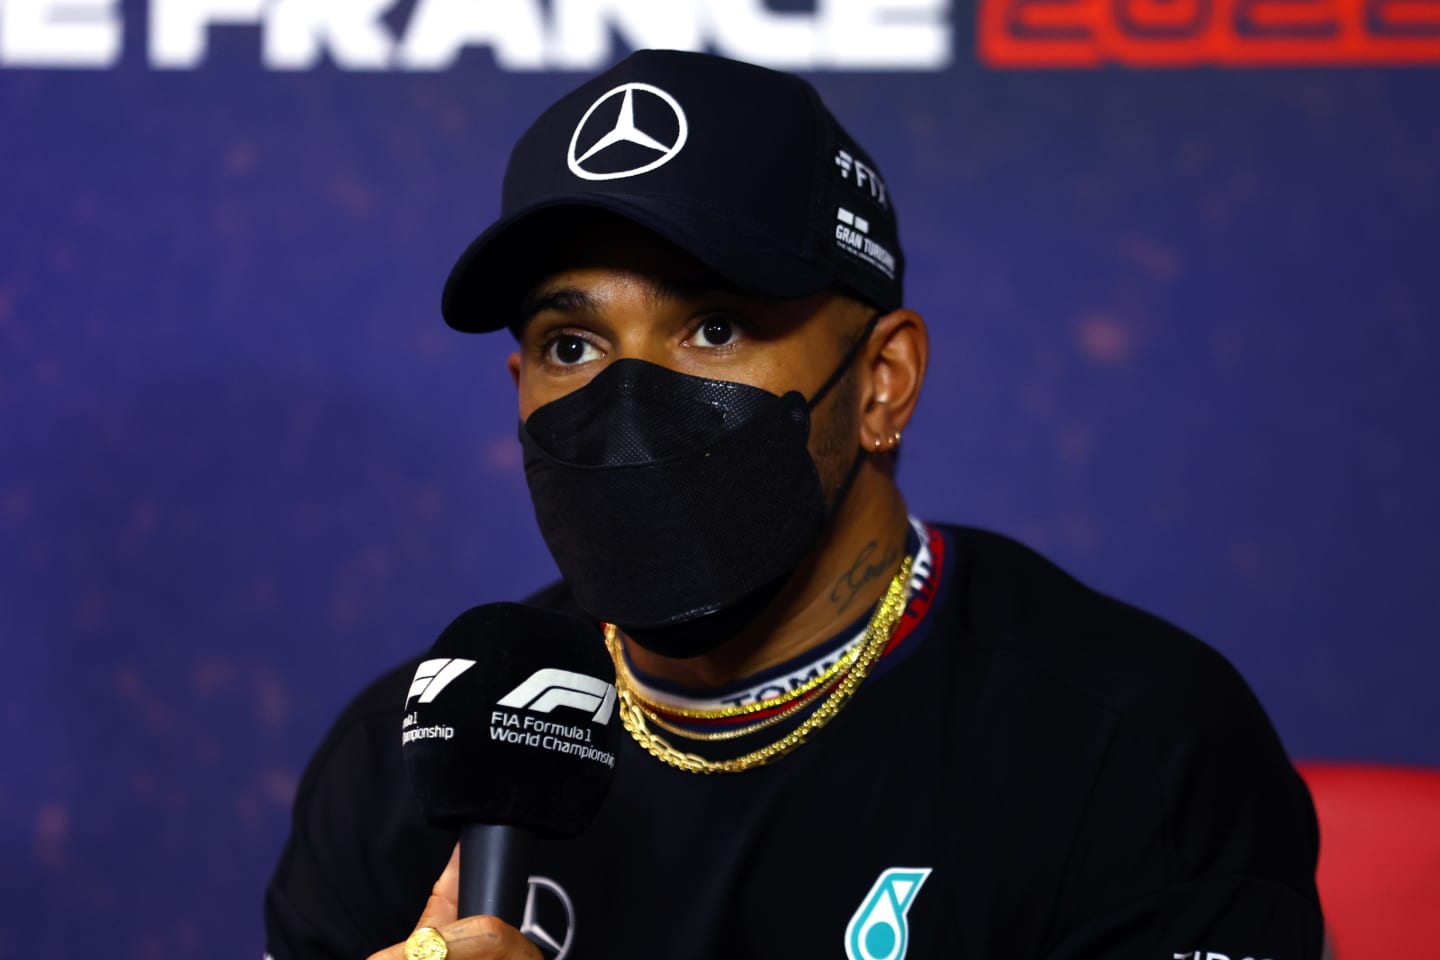 LE CASTELLET, FRANCE - JULY 21: Lewis Hamilton of Great Britain and Mercedes talks in the Drivers Press Conference during previews ahead of the F1 Grand Prix of France at Circuit Paul Ricard on July 21, 2022 in Le Castellet, France. (Photo by Bryn Lennon - Formula 1/Formula 1 via Getty Images)